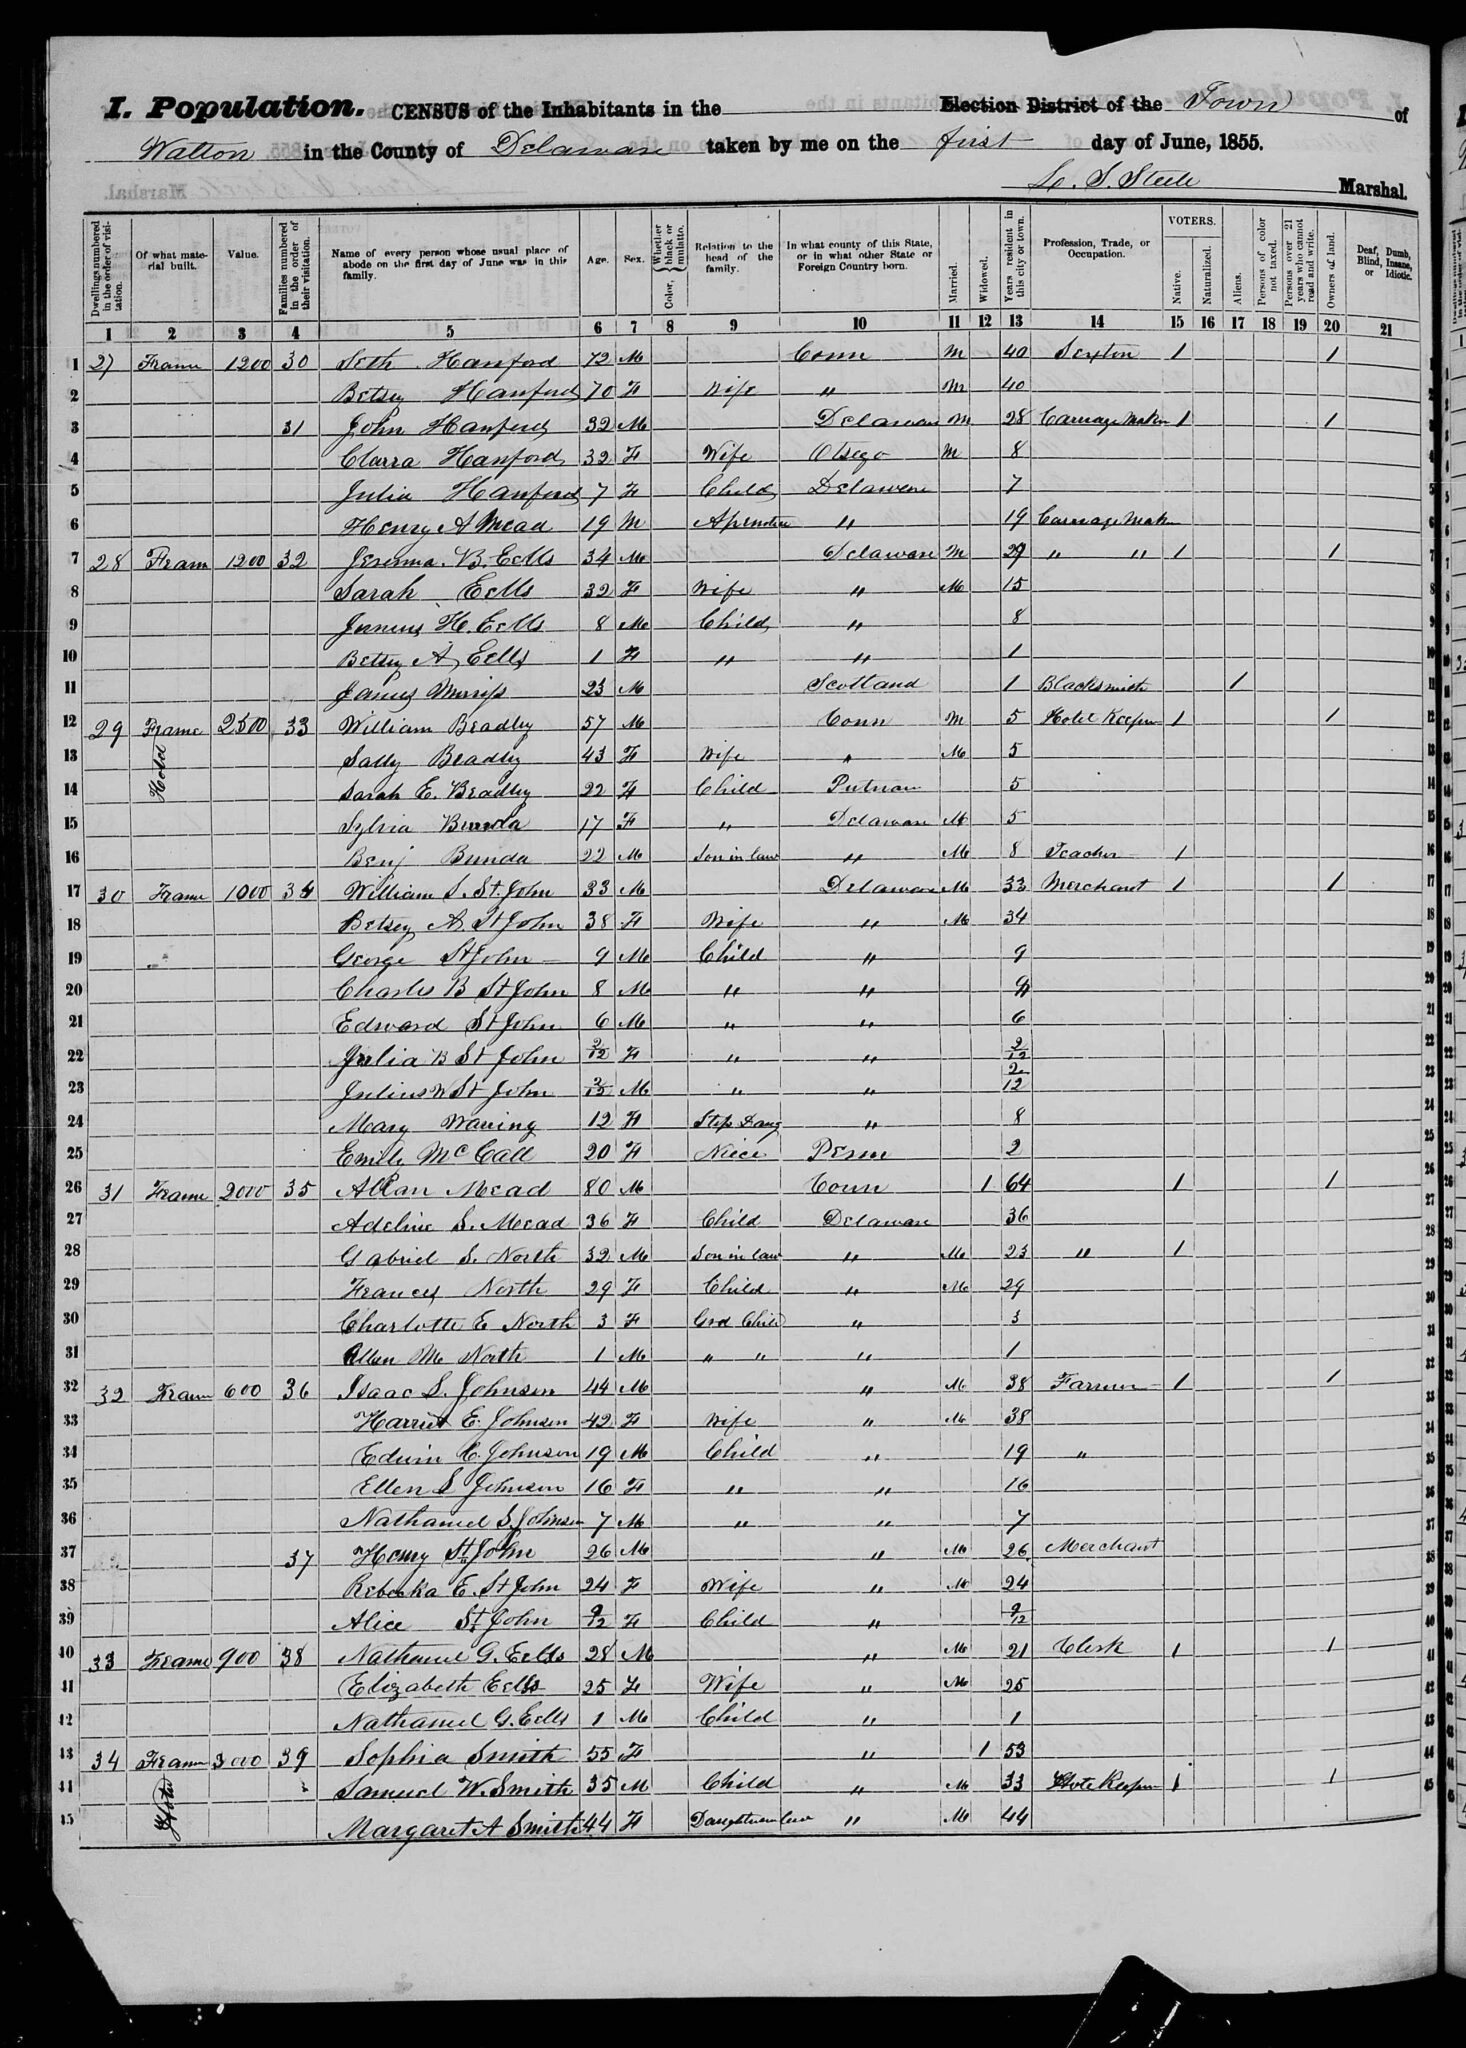 New York state census record